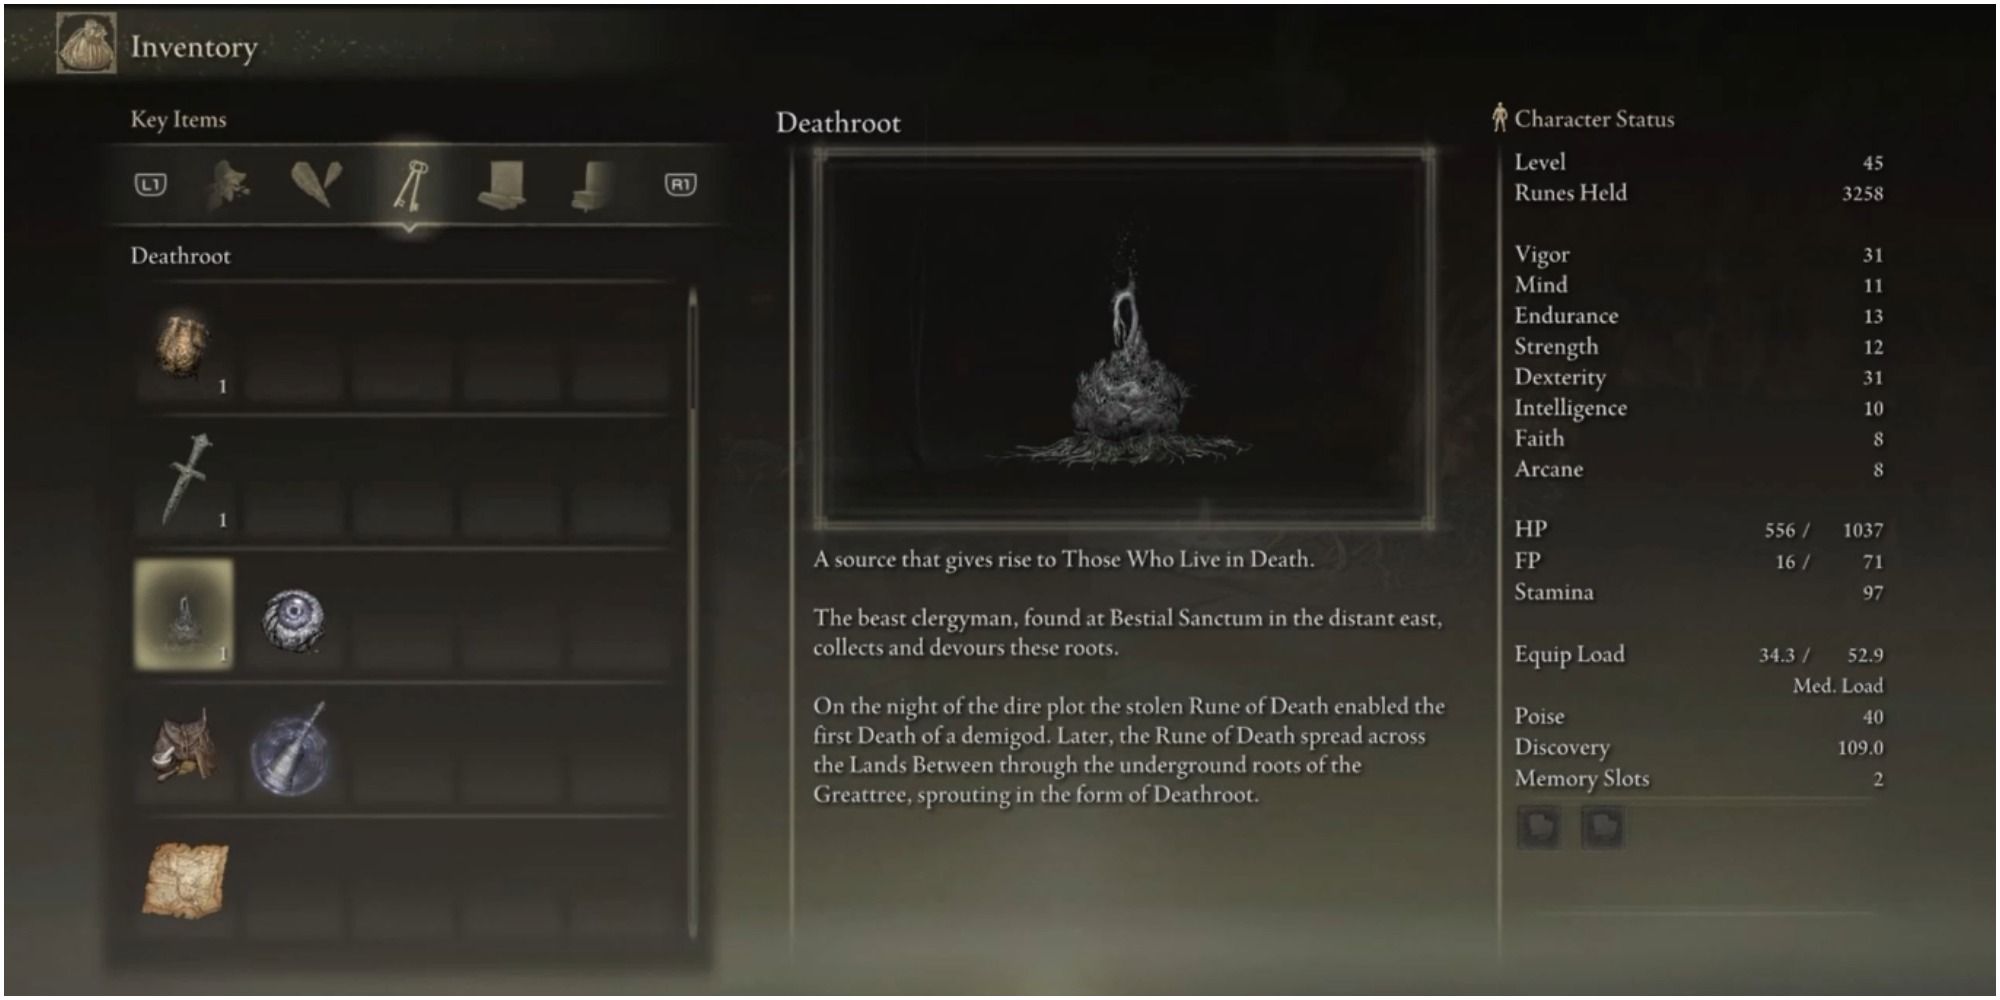 Image showing information on Deathroot, a key item found in the game.